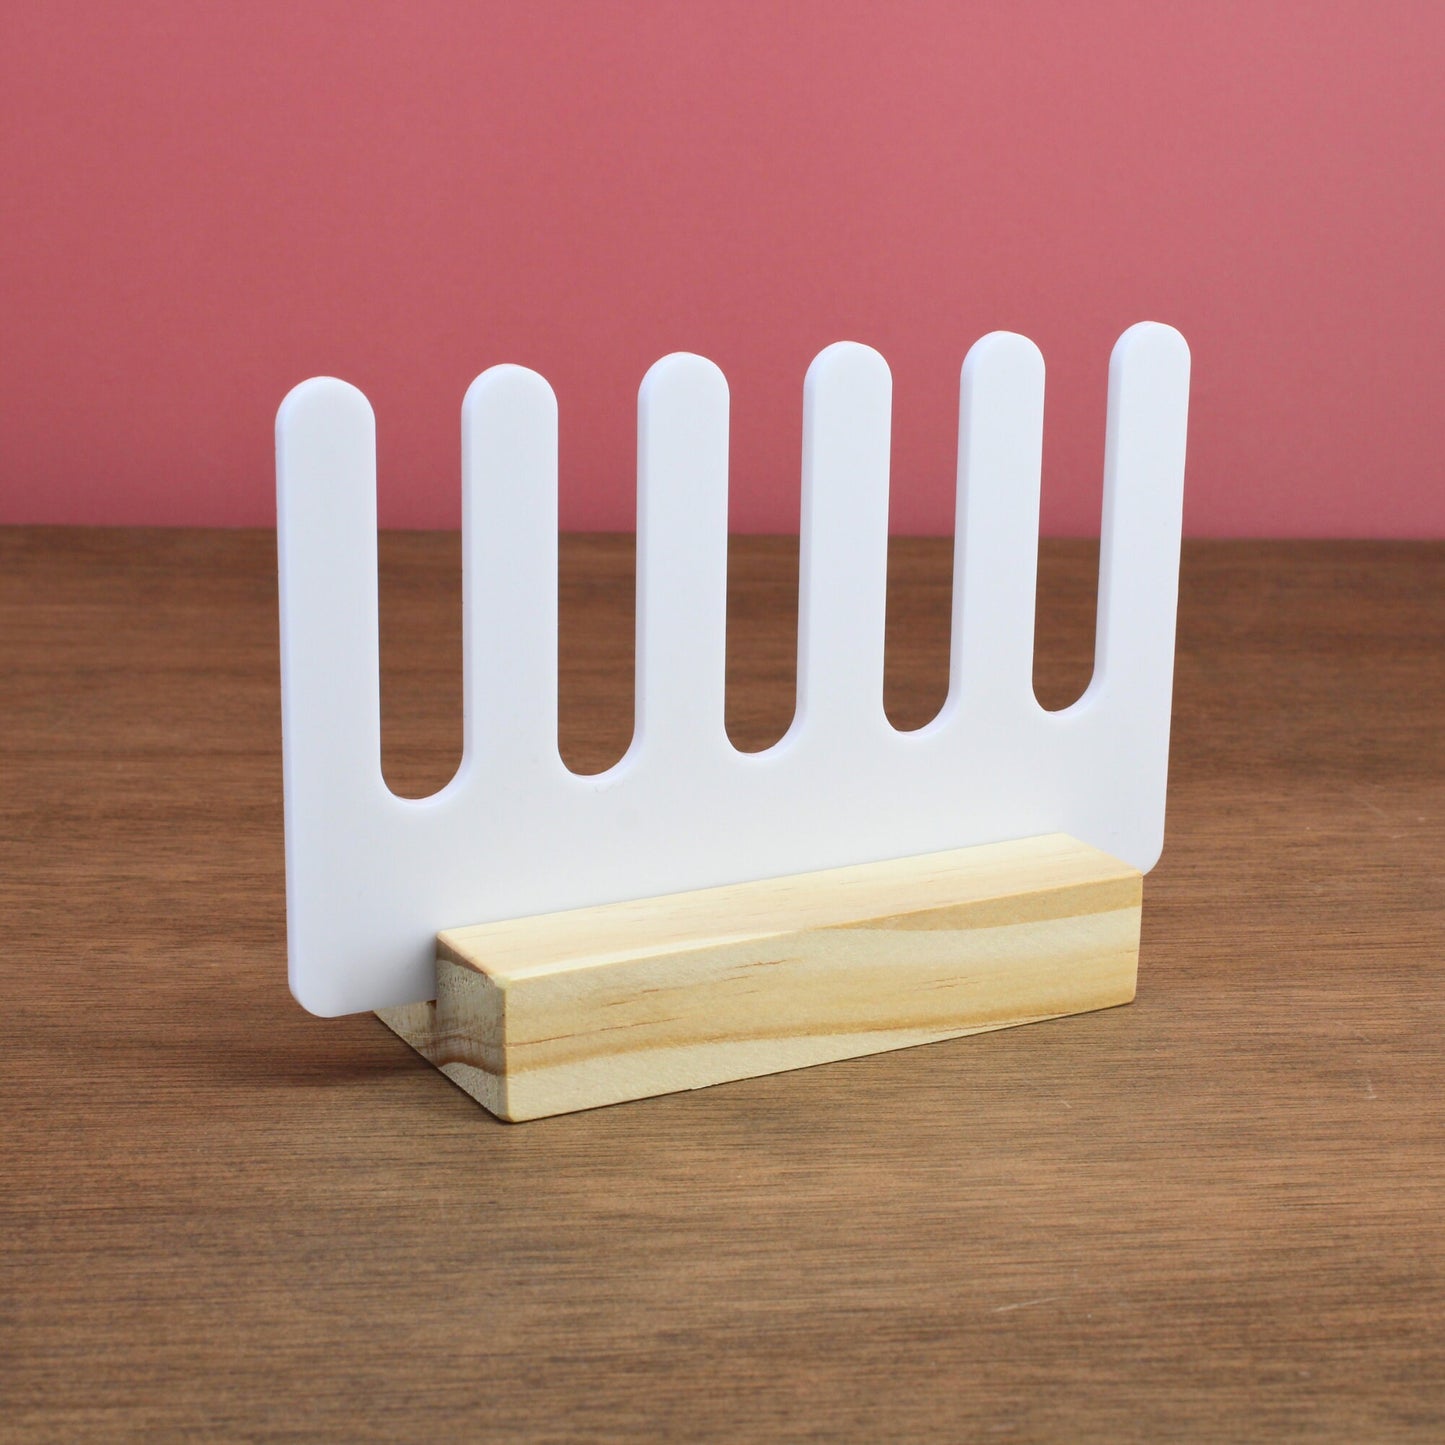 Minimalist Ring Holder Stand - White Ring Box Display on Wooden Base